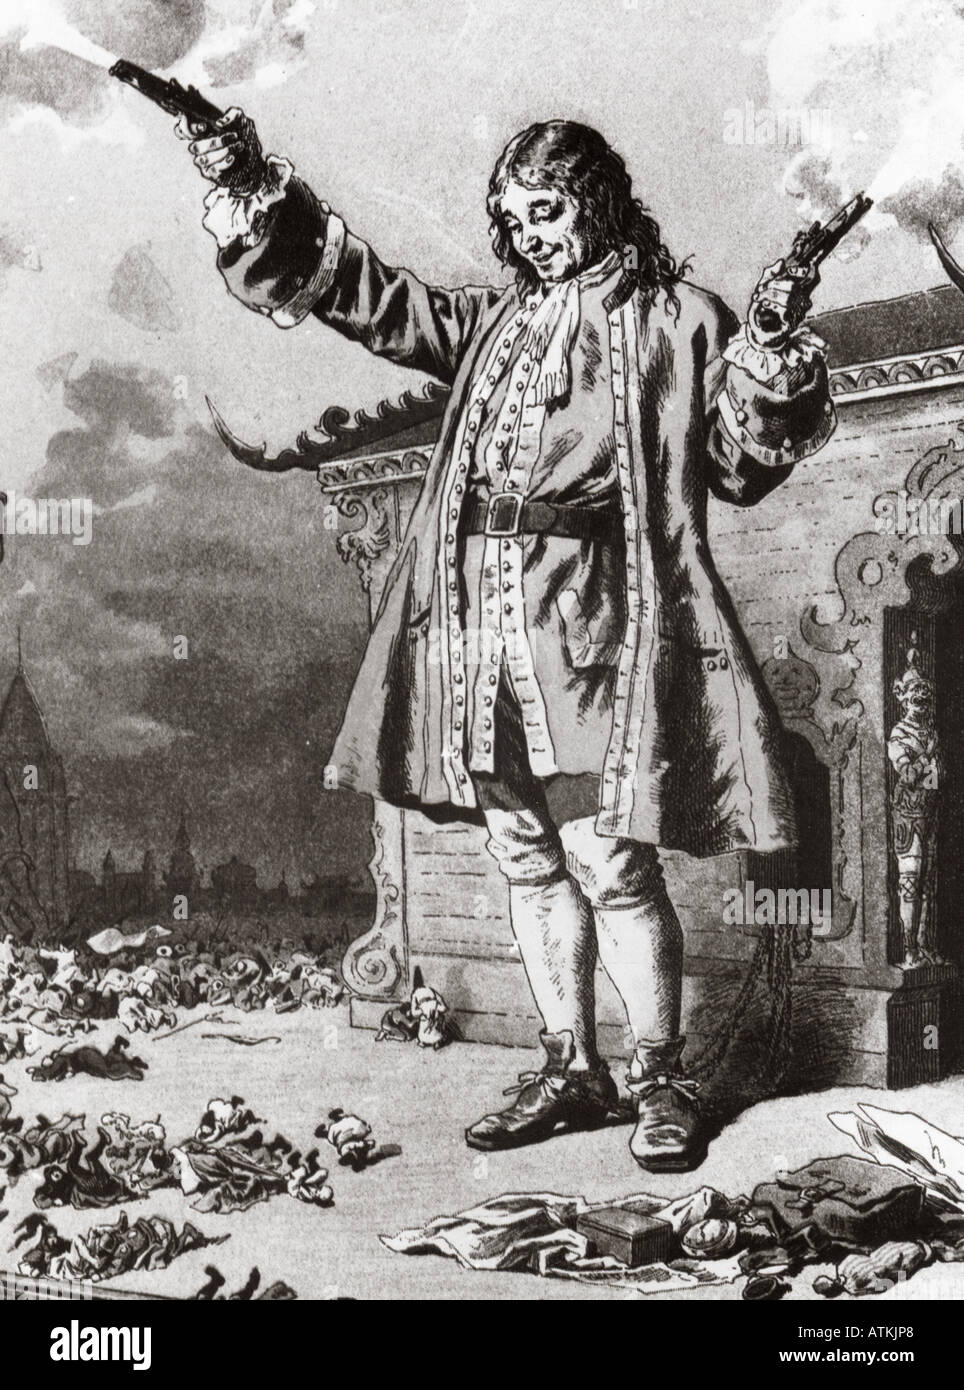 GULLIVER'S TRAVELS  illustration for the 1726 novel by Jonathan Swift - see Description below for details Stock Photo